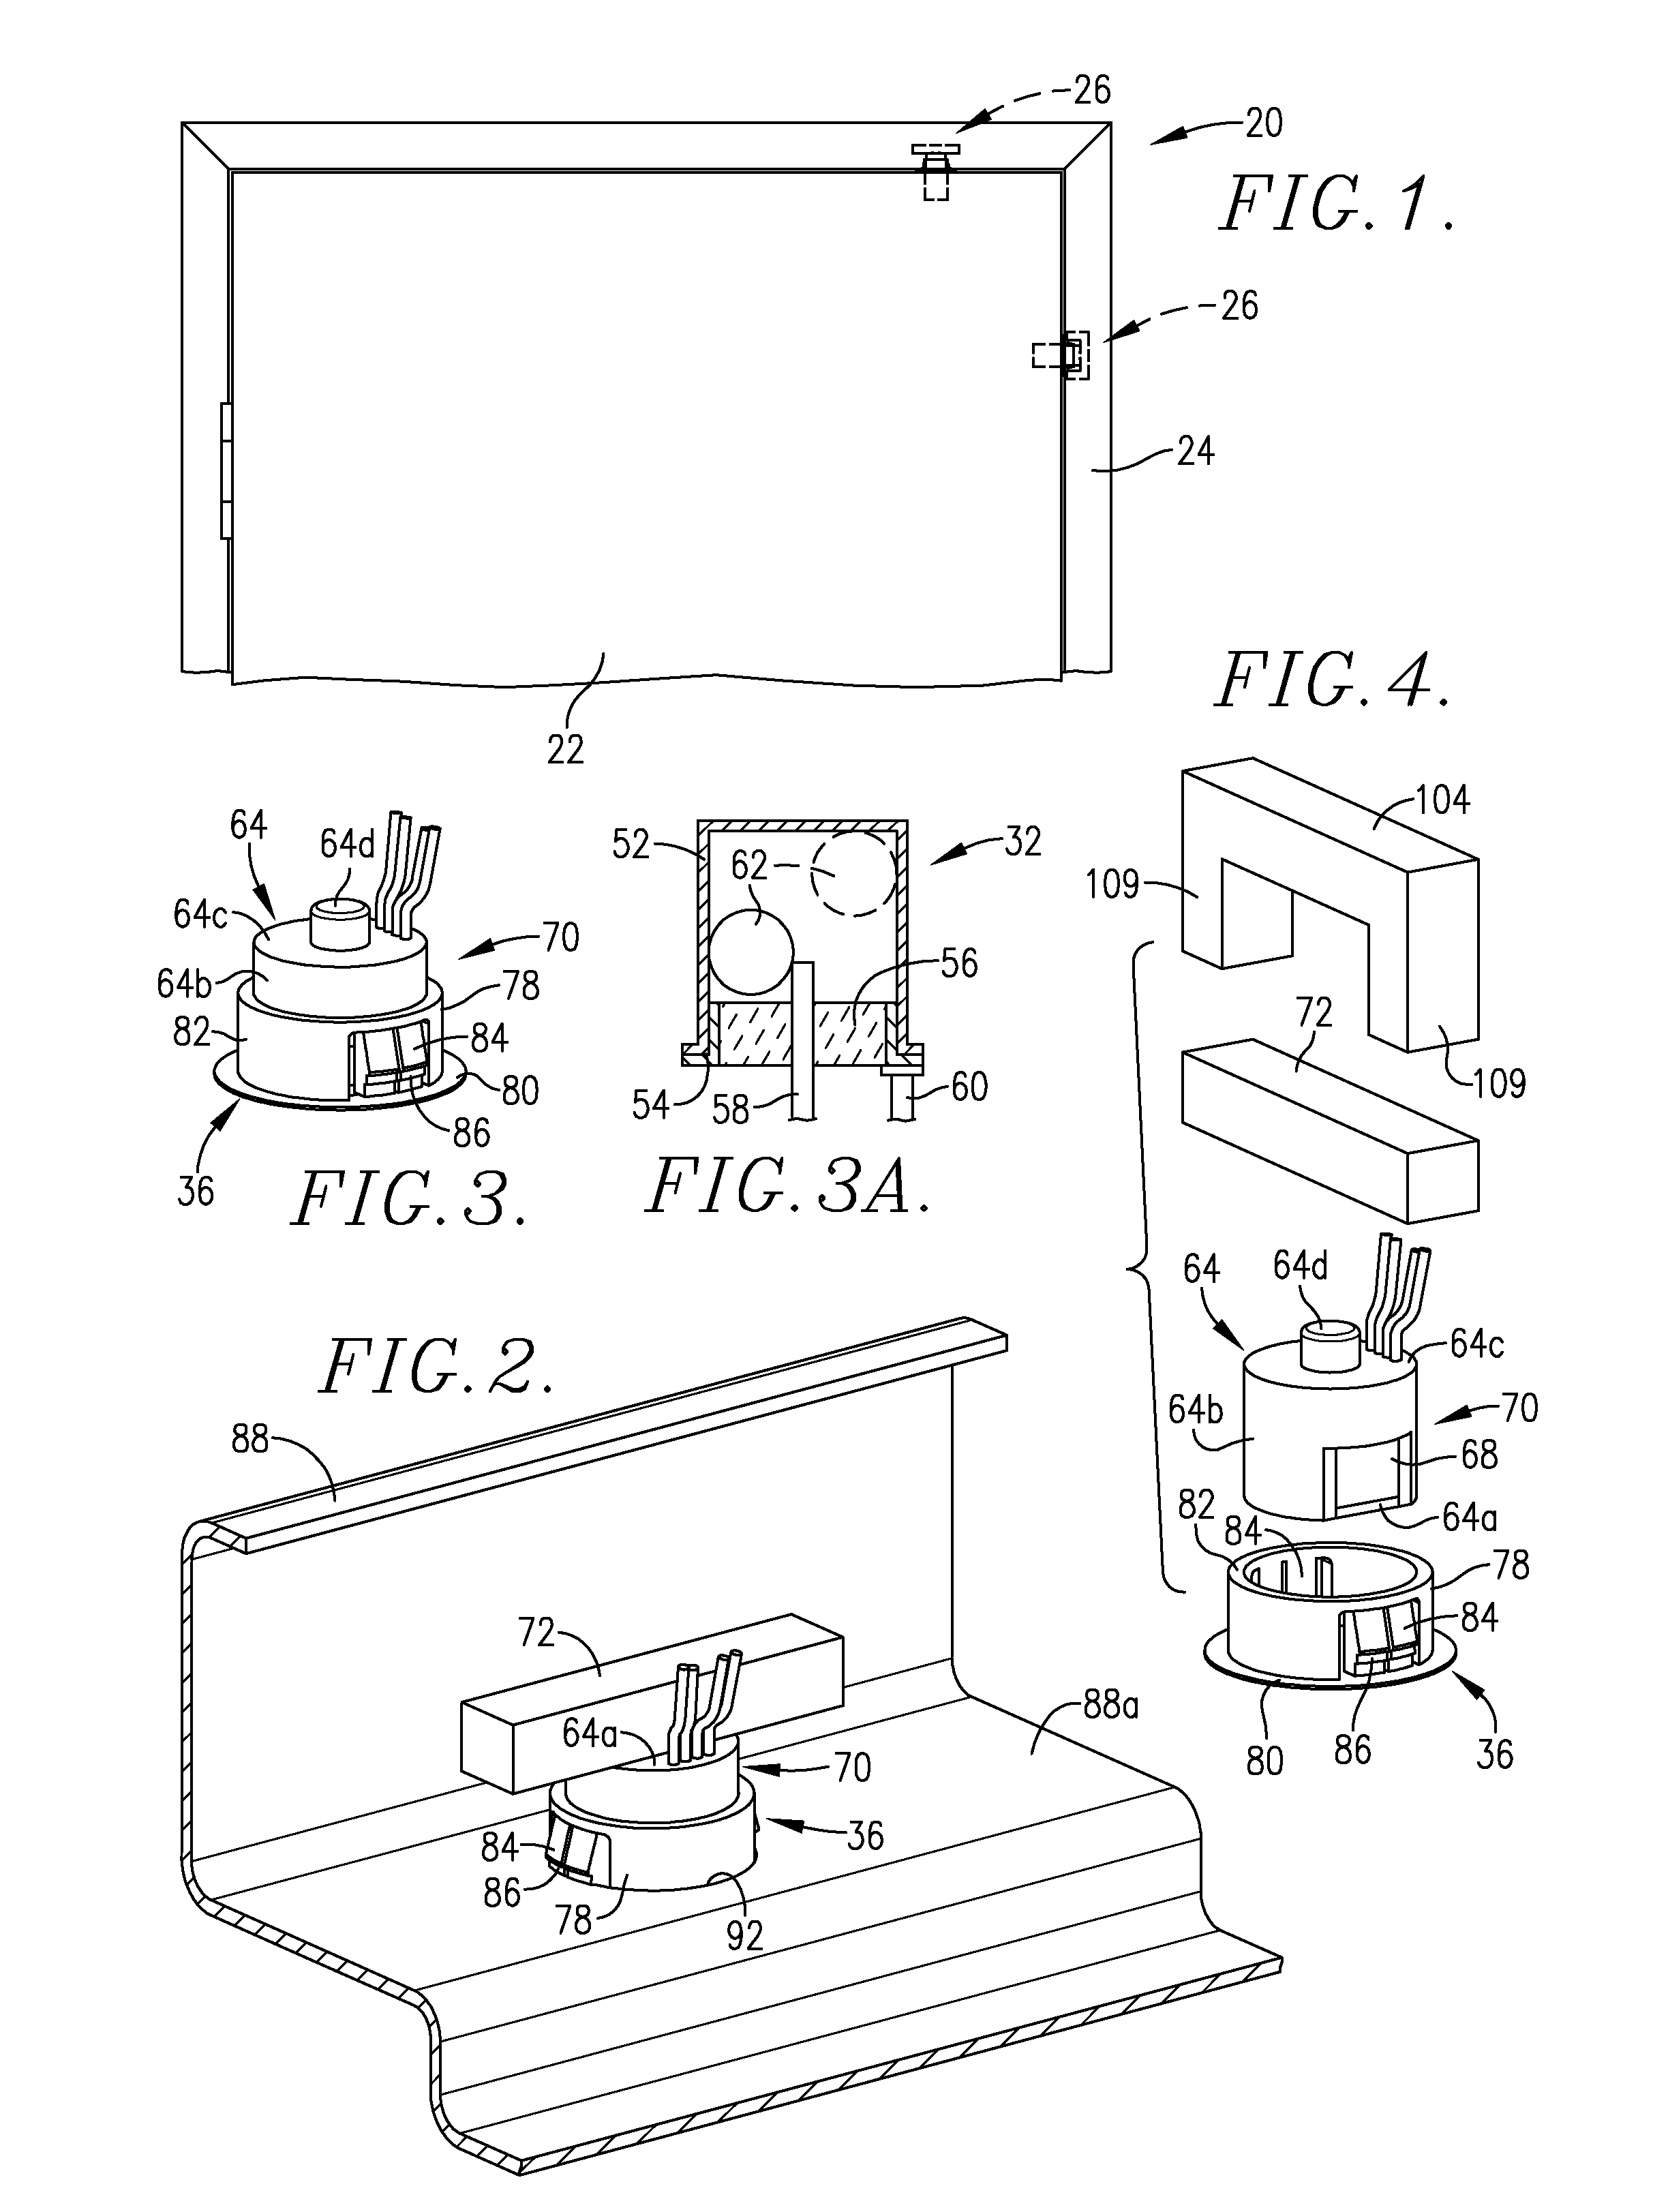 High security switch assembly